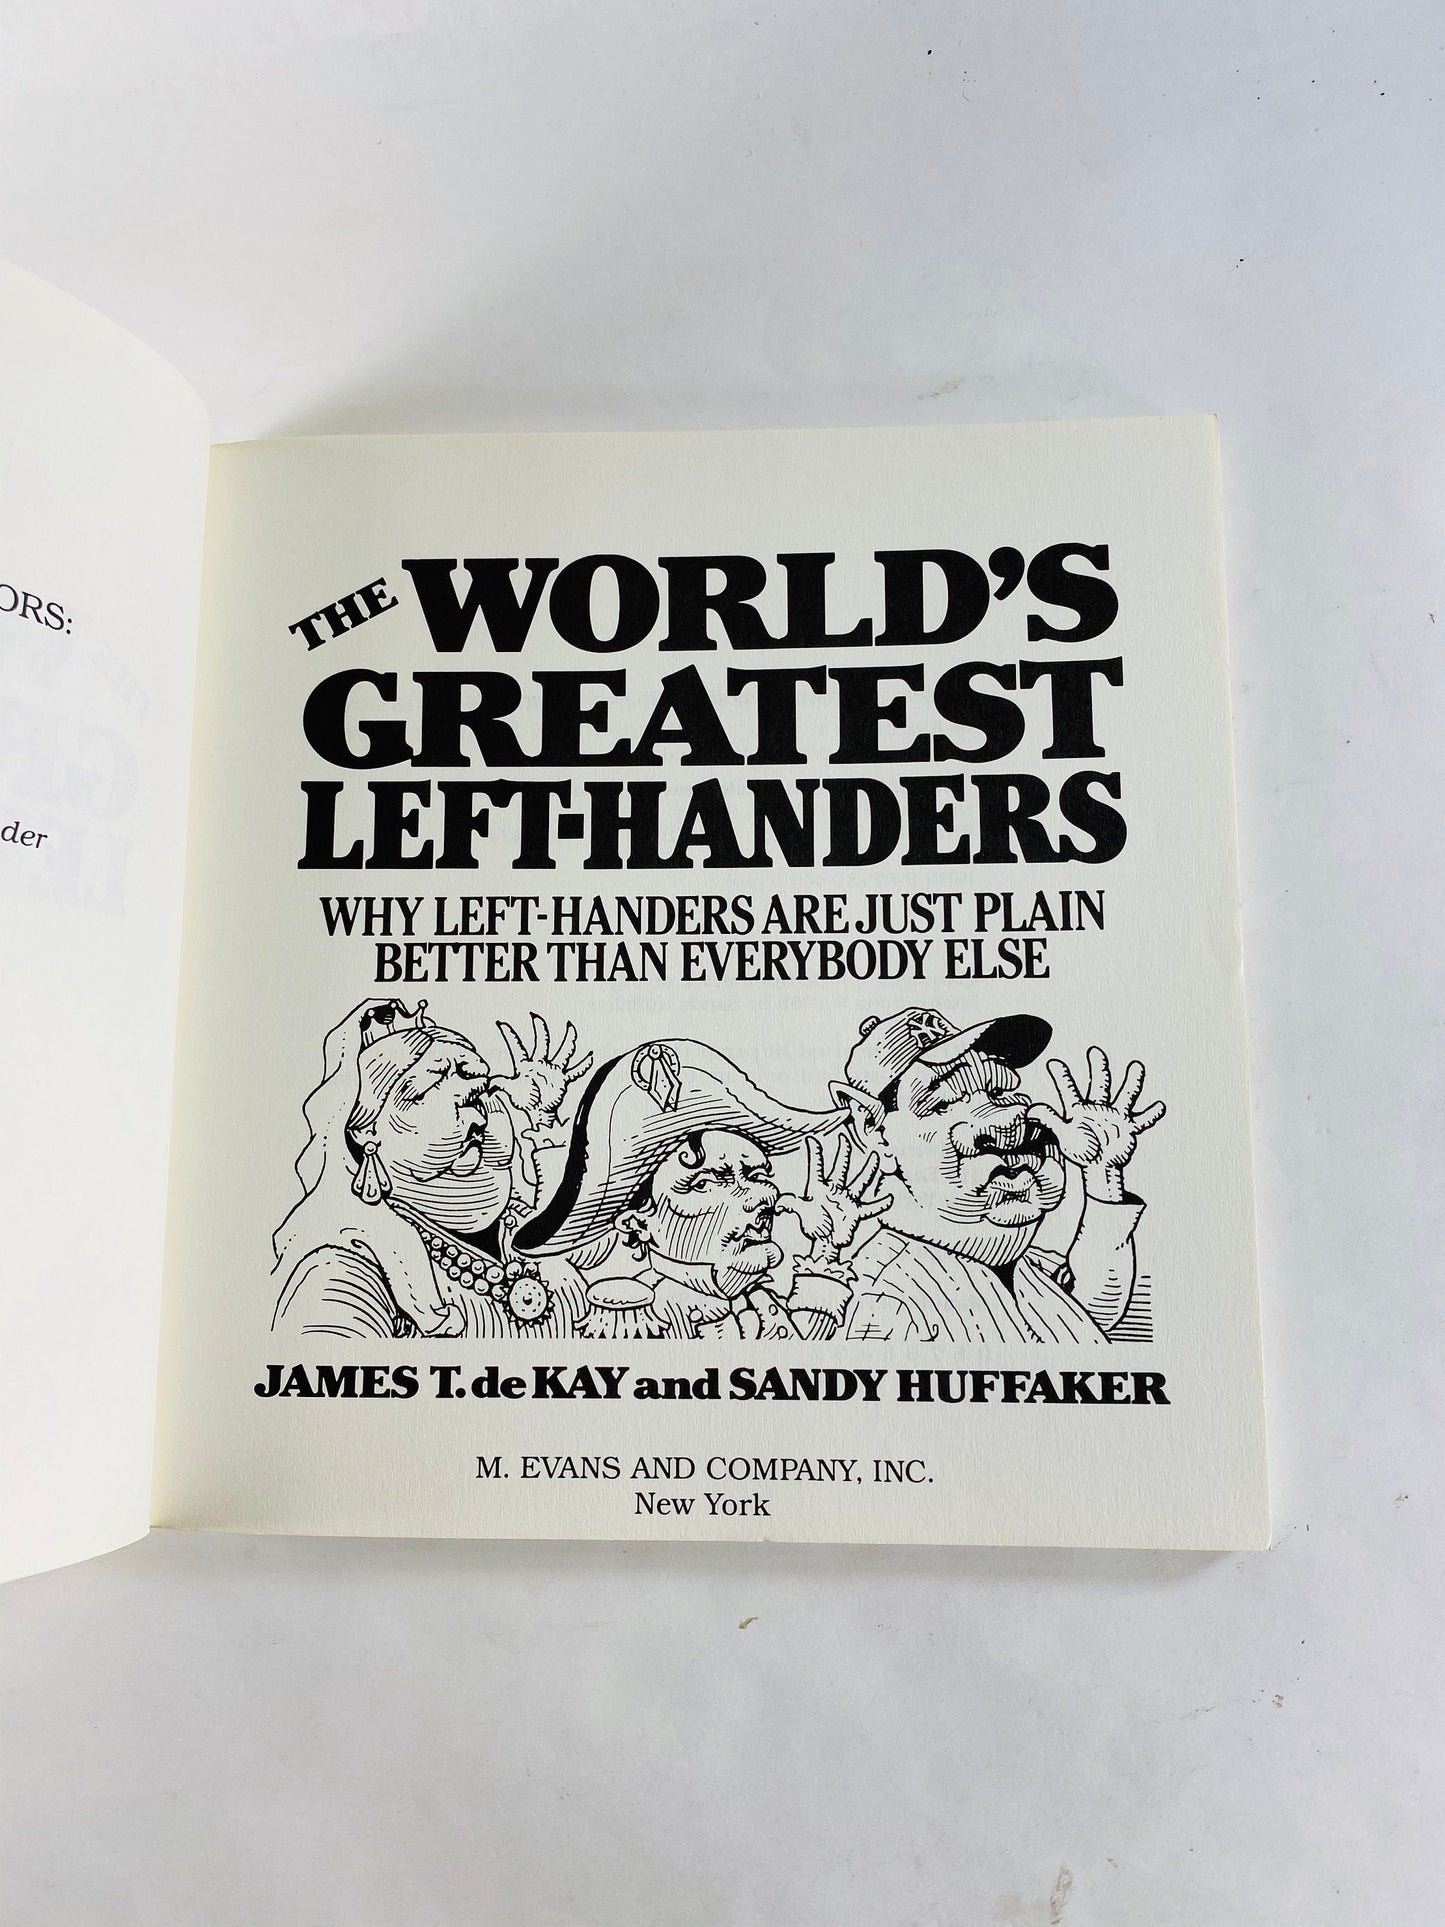 1985 World's Greatest Left-Handers. Why Left Handers are Just Plain Better than Everybody Else Vintage paperback book by James T deKay.